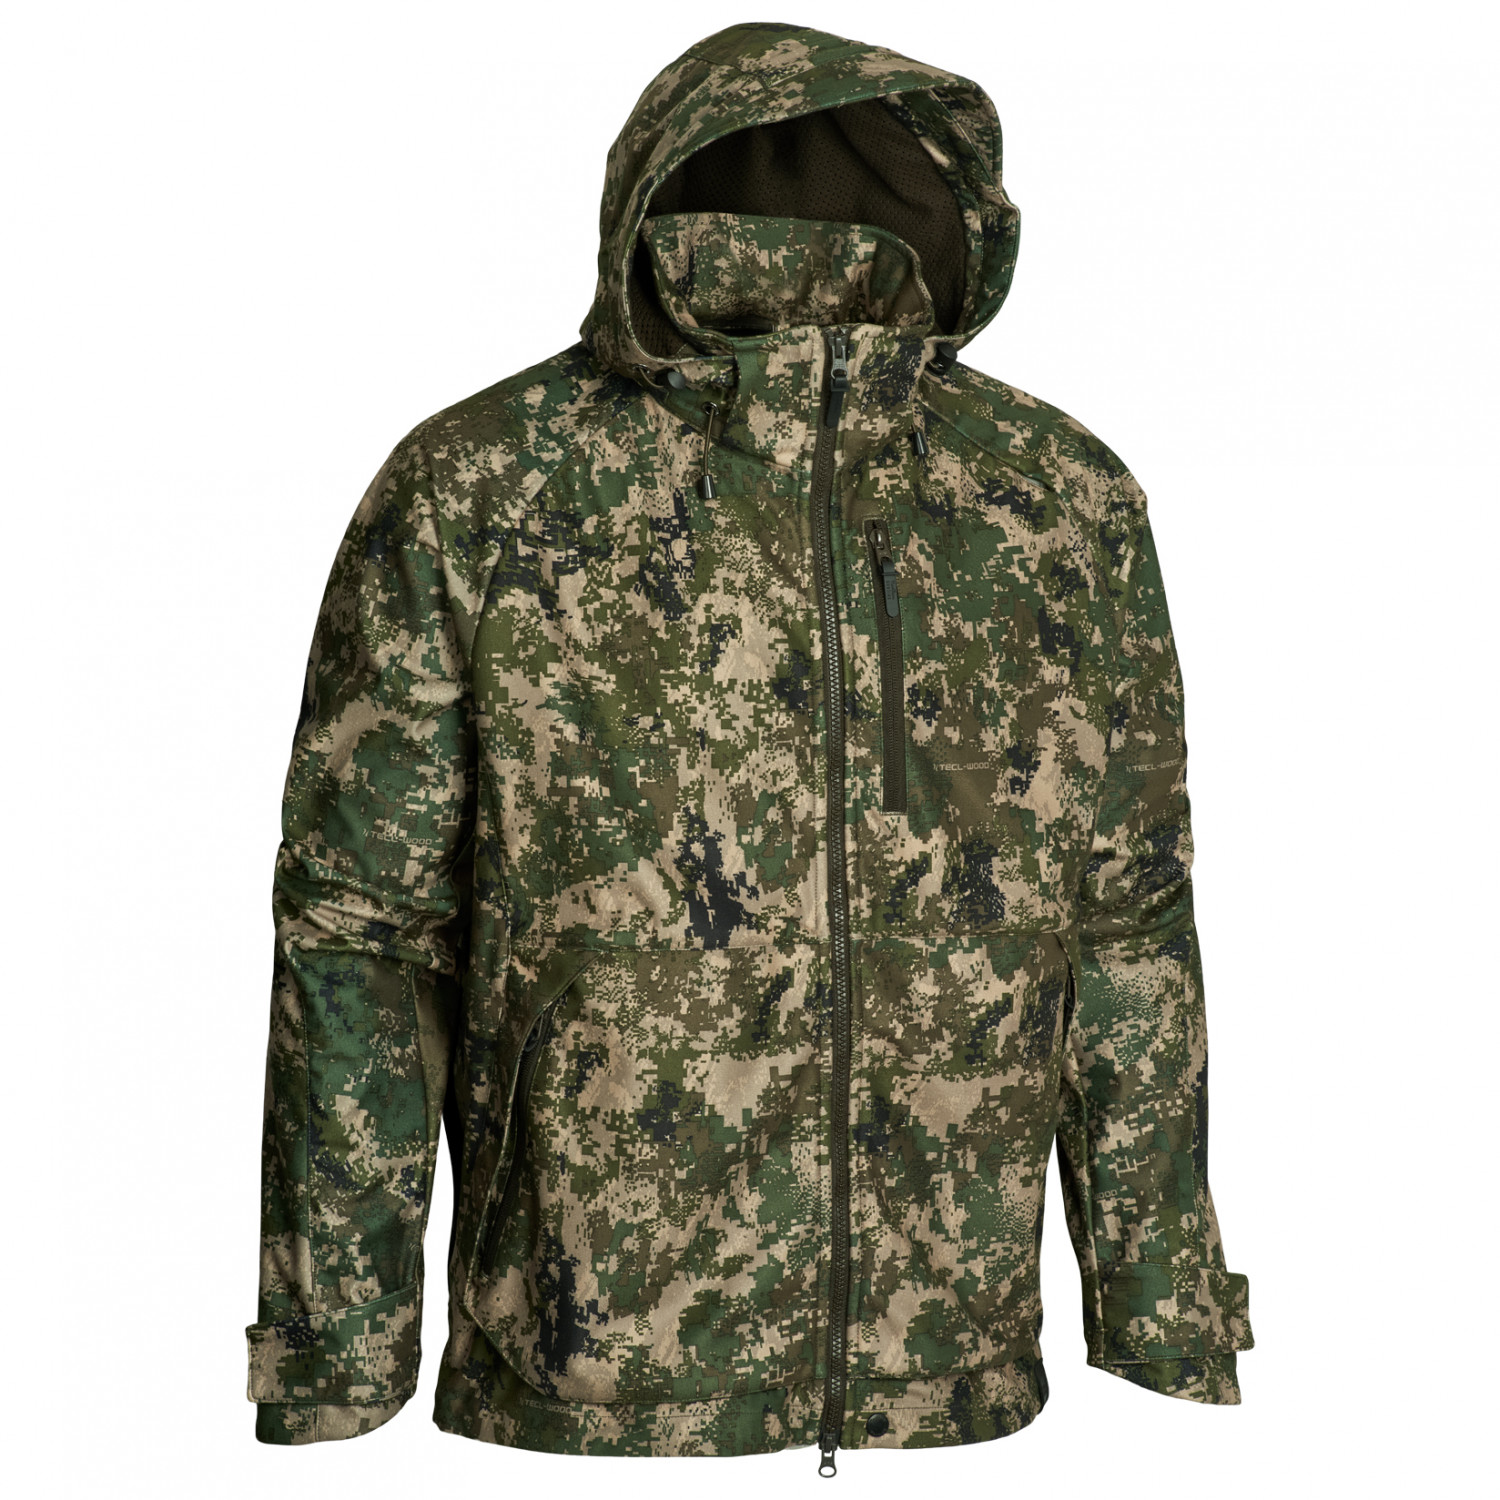 Дождевик Northern Hunting Torg Falki, цвет Camouflage Opt 9 camouflage clothing menswear military tactics of autumn winter clothes outdoors hunting camouflage uniform